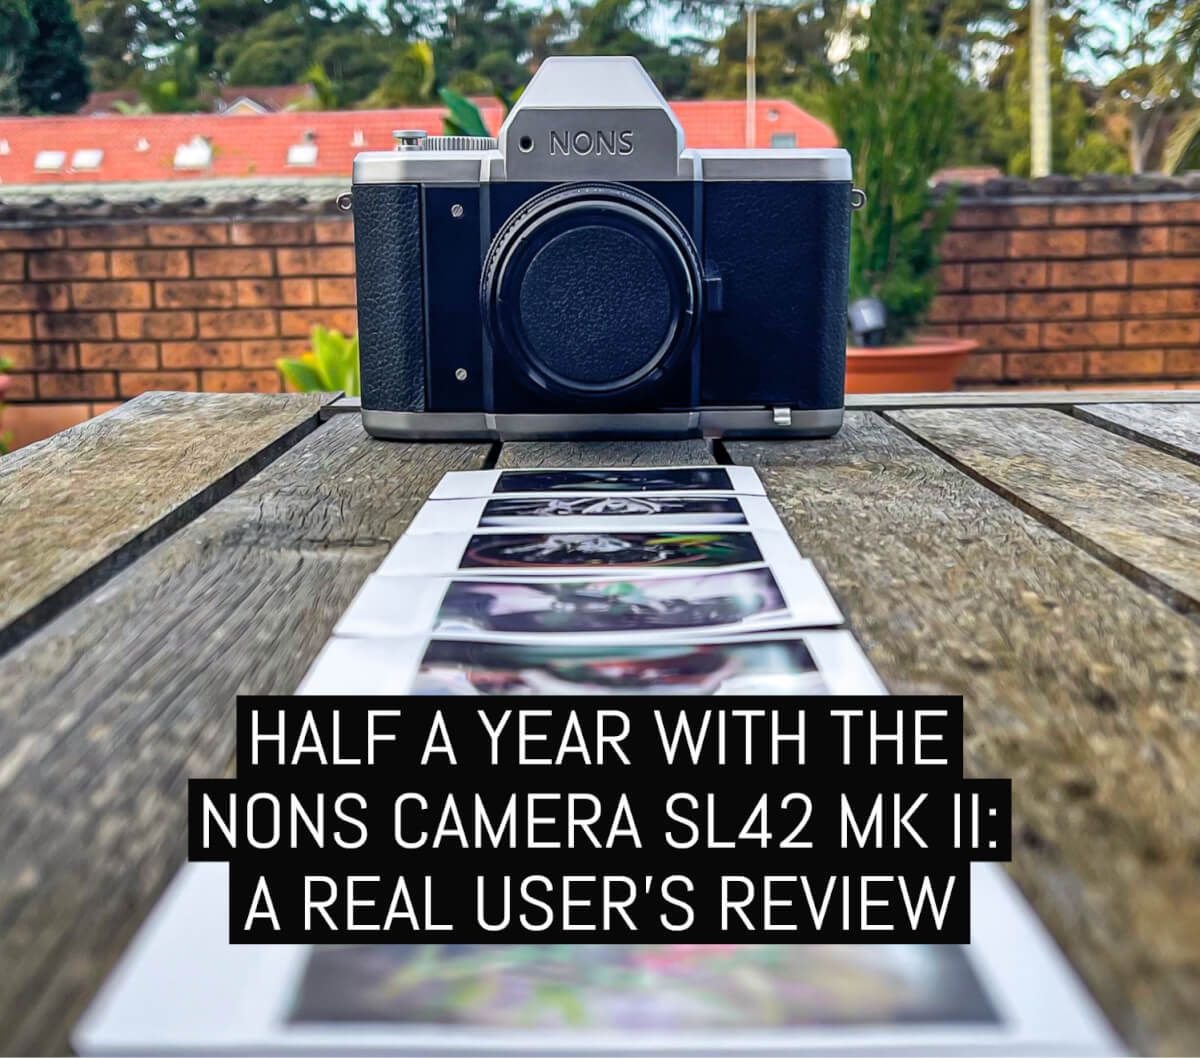 Half a year with the Nons Camera SL42 Mk II, a real user's review